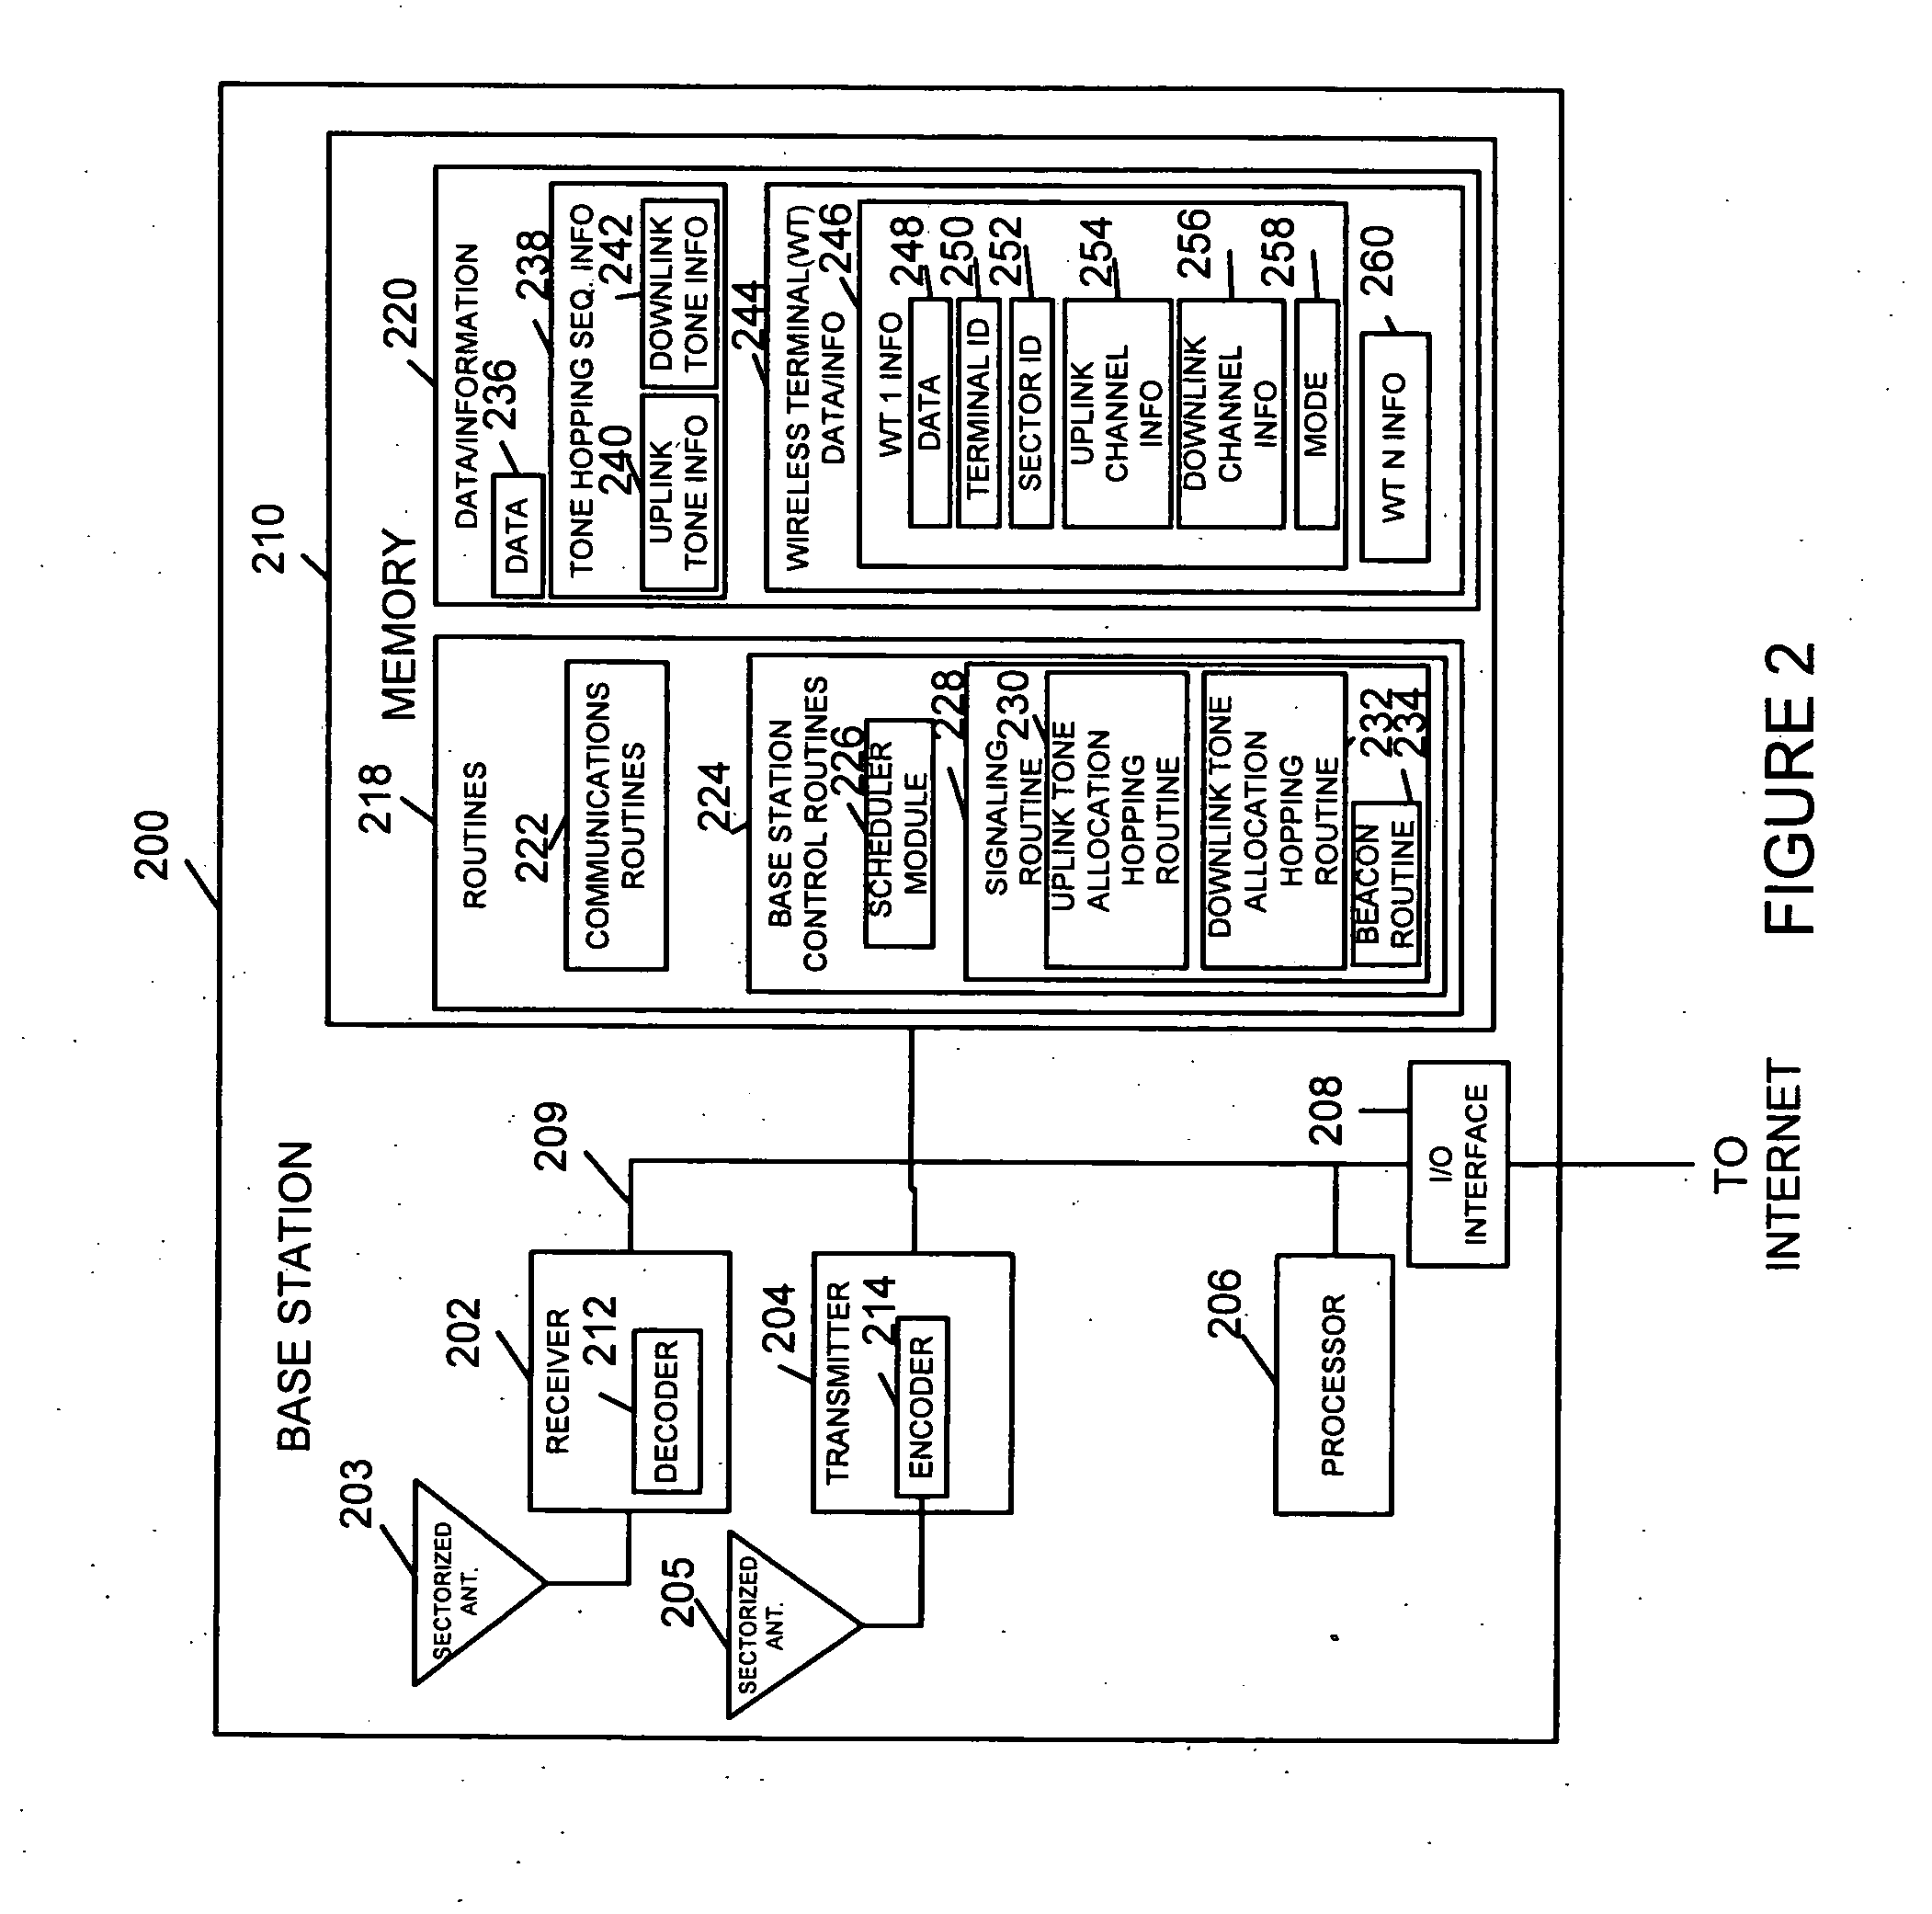 Tone hopping methods and apparatus